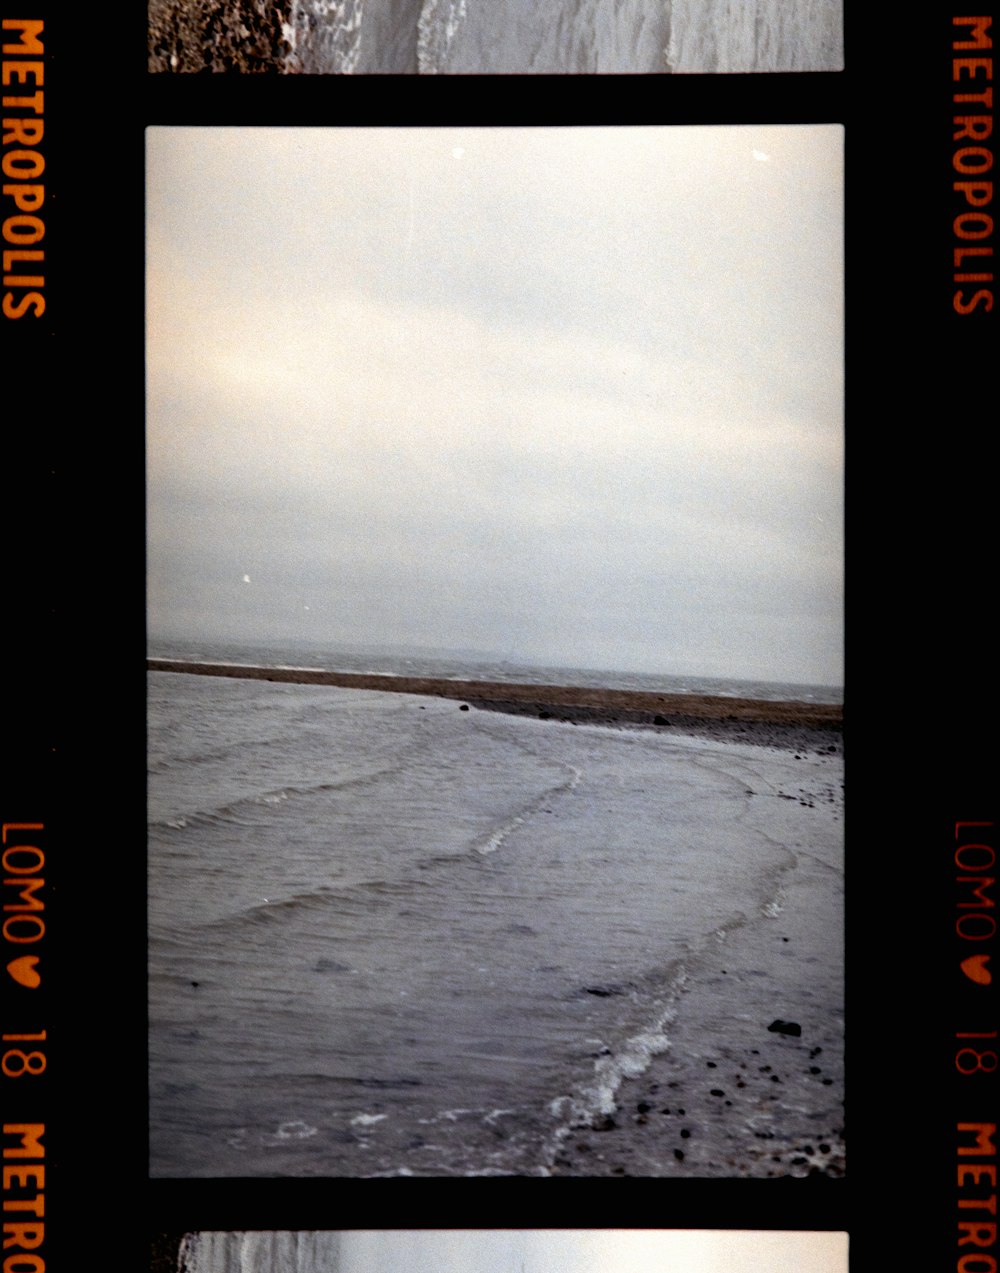 a polaroid picture of a beach and a body of water